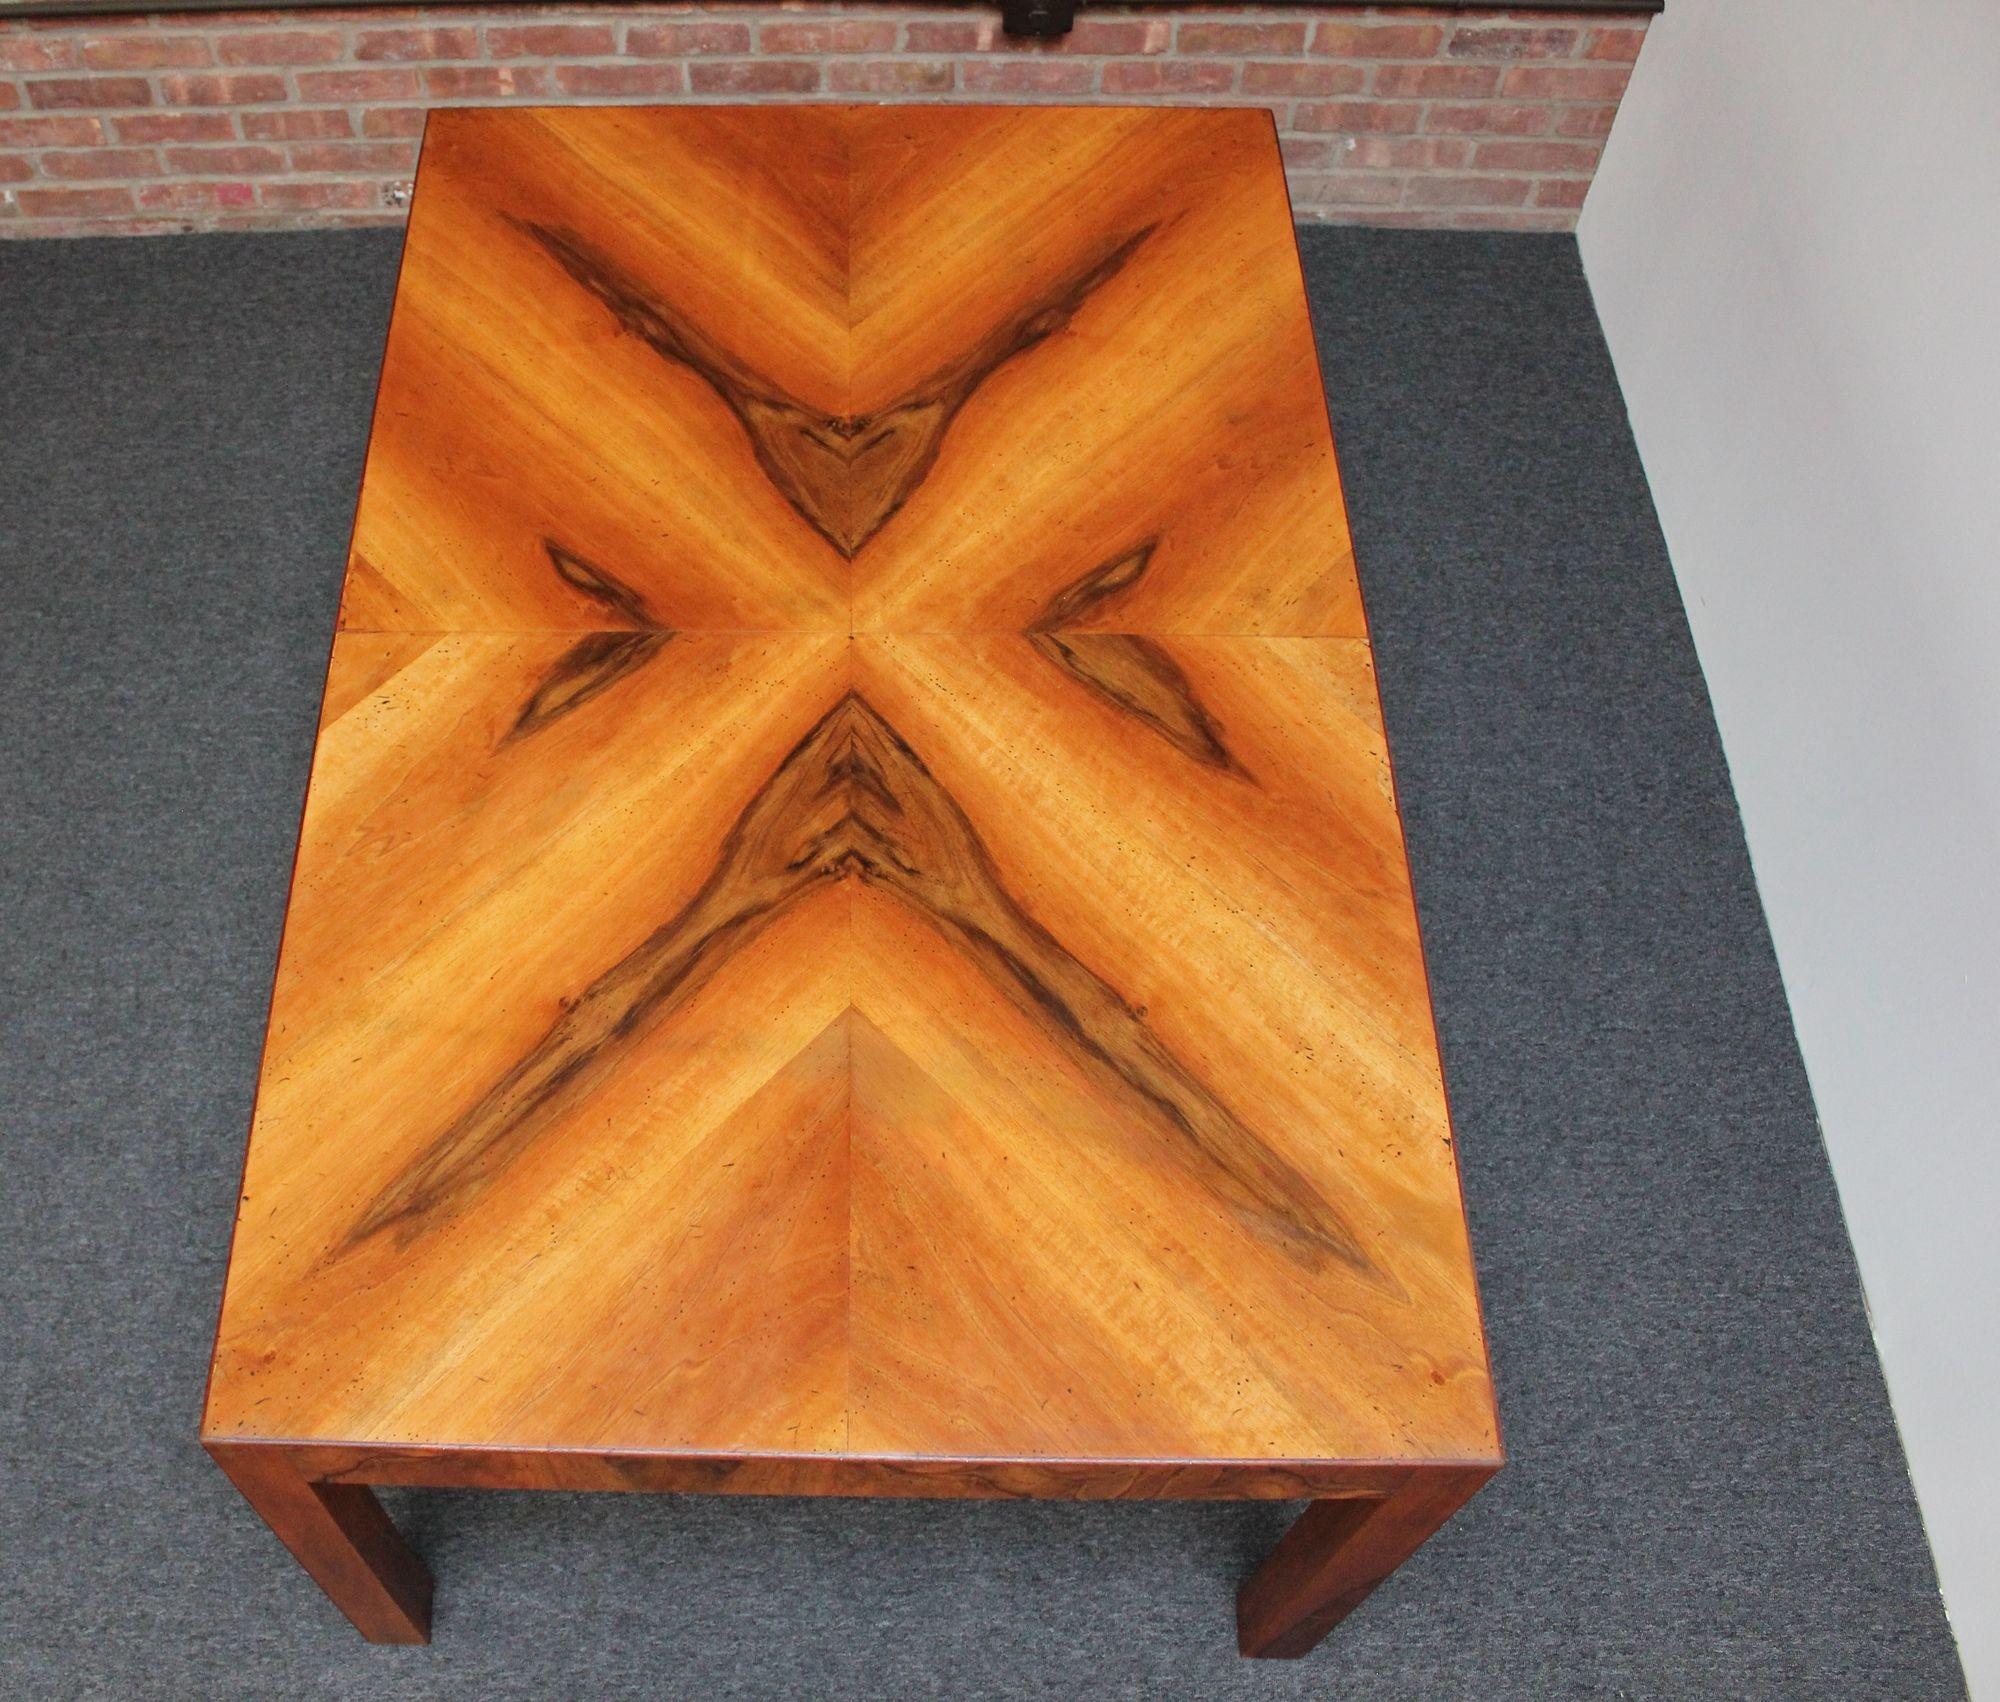 Late 20th Century Vintage Italian Walnut Parsons Style Chevron Dining Table with Two Leaves